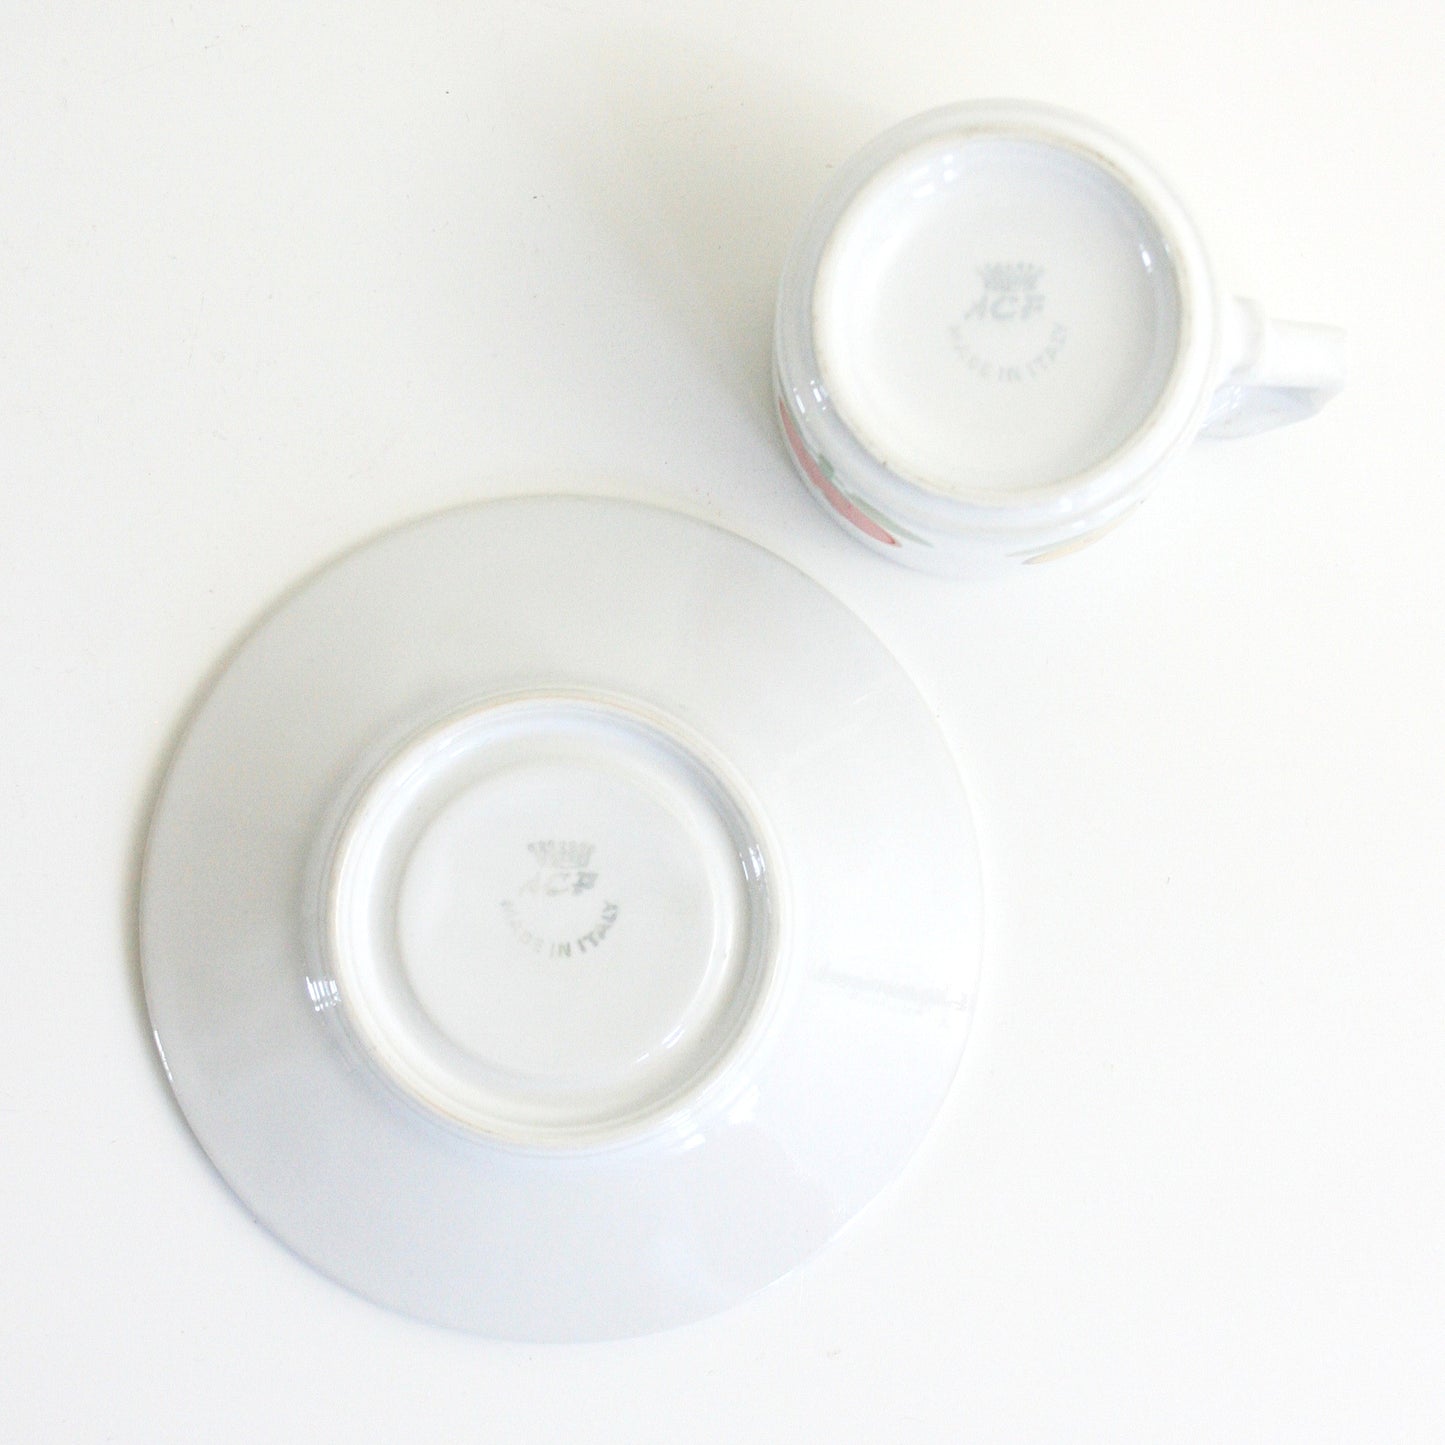 SOLD - Mid Century Tulip Demitasse Cups by ACF Italy